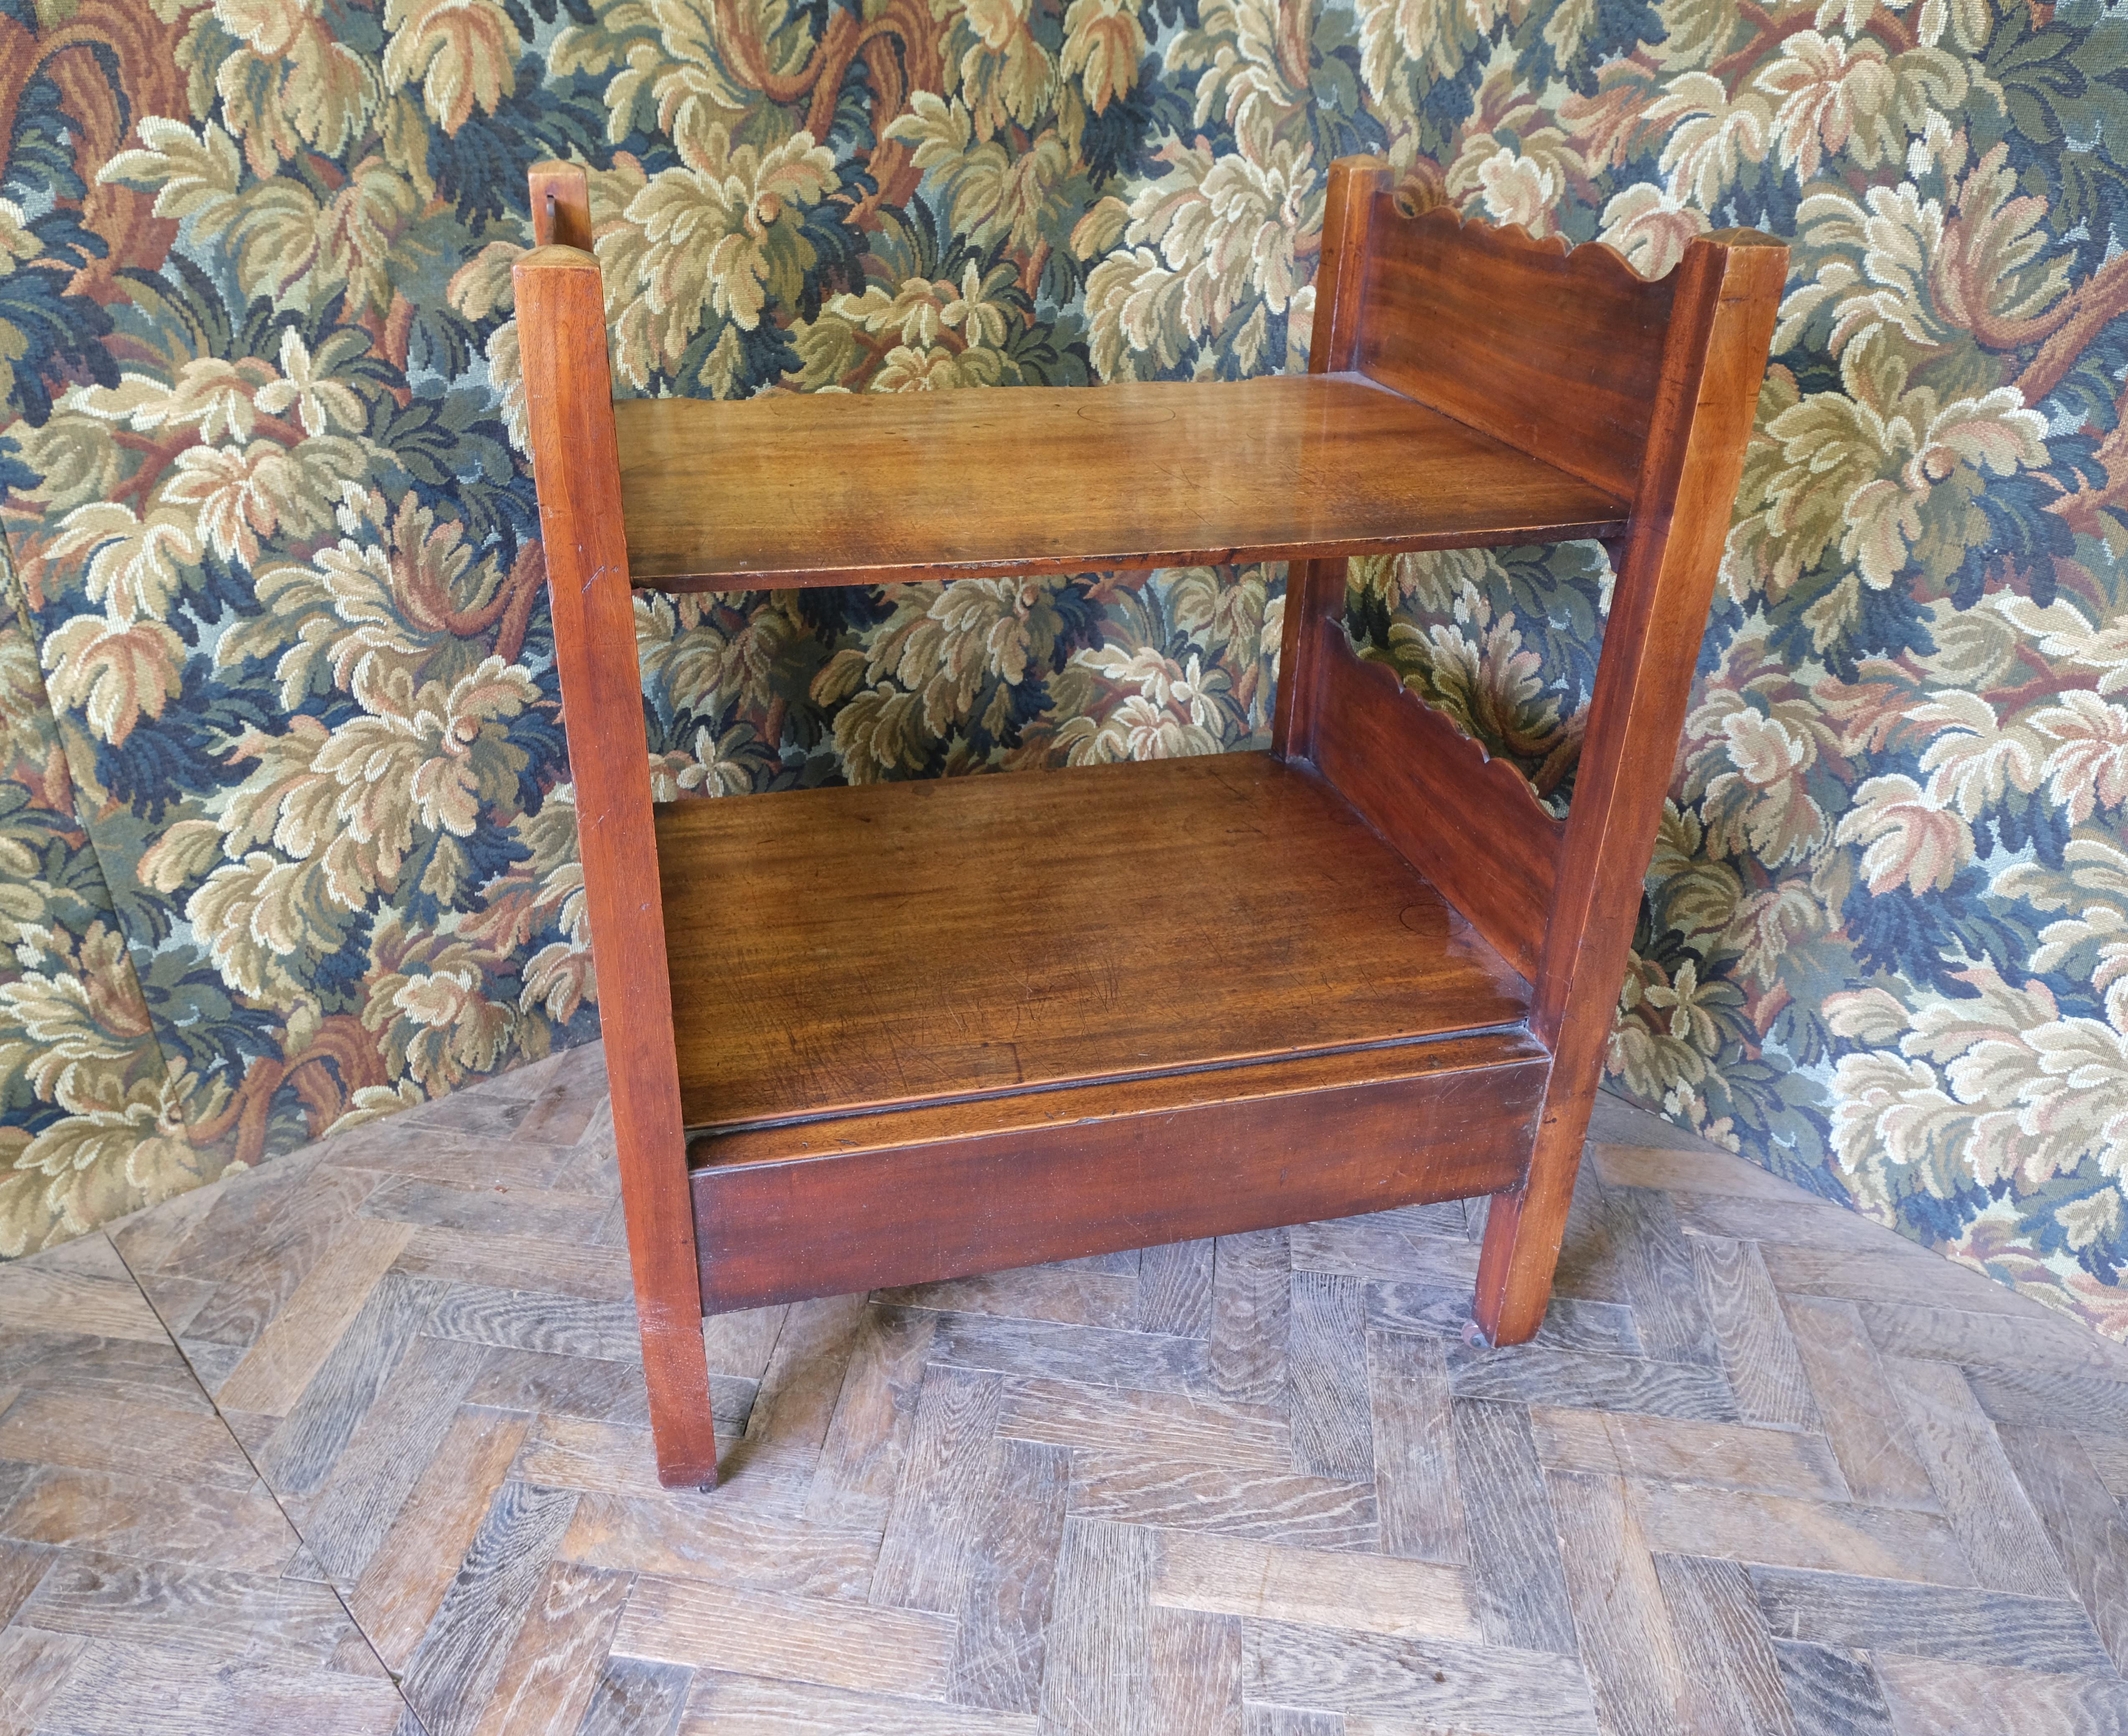 Hutton-Clarke Antiques proudly presents a unique Georgian mahogany table stand/whatnot, circa 1760. Crafted from solid mahogany with original axe head handles and double serpentine-shaped sides, it features a fixed shelf and wide country house